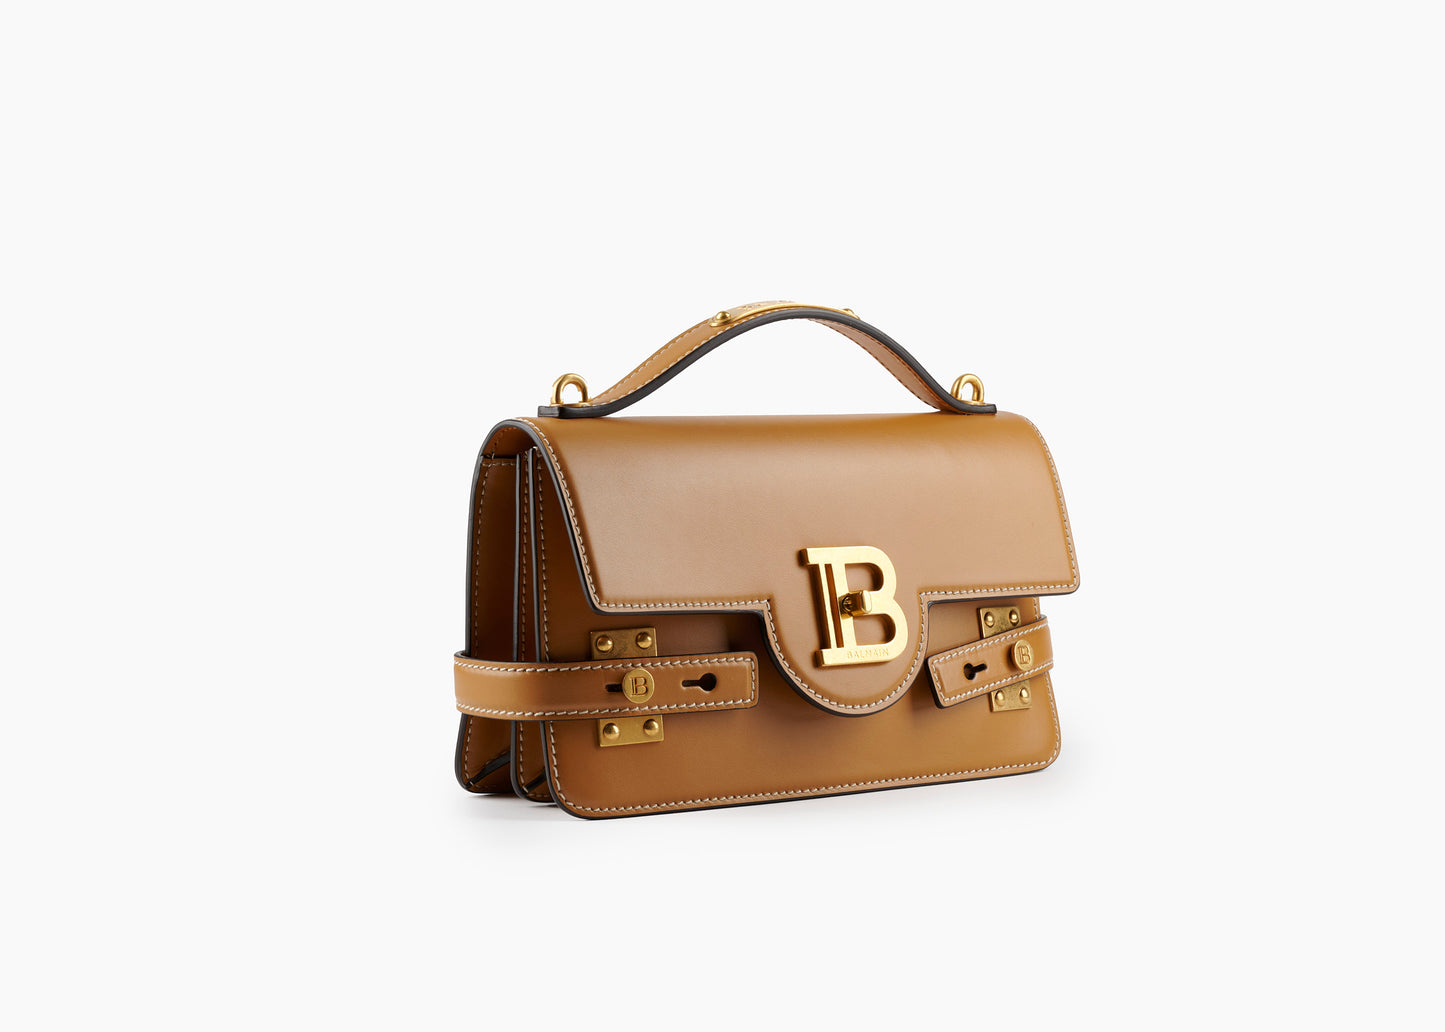 B-Buzz 24 Shoulder Bag Smooth Leather Tan